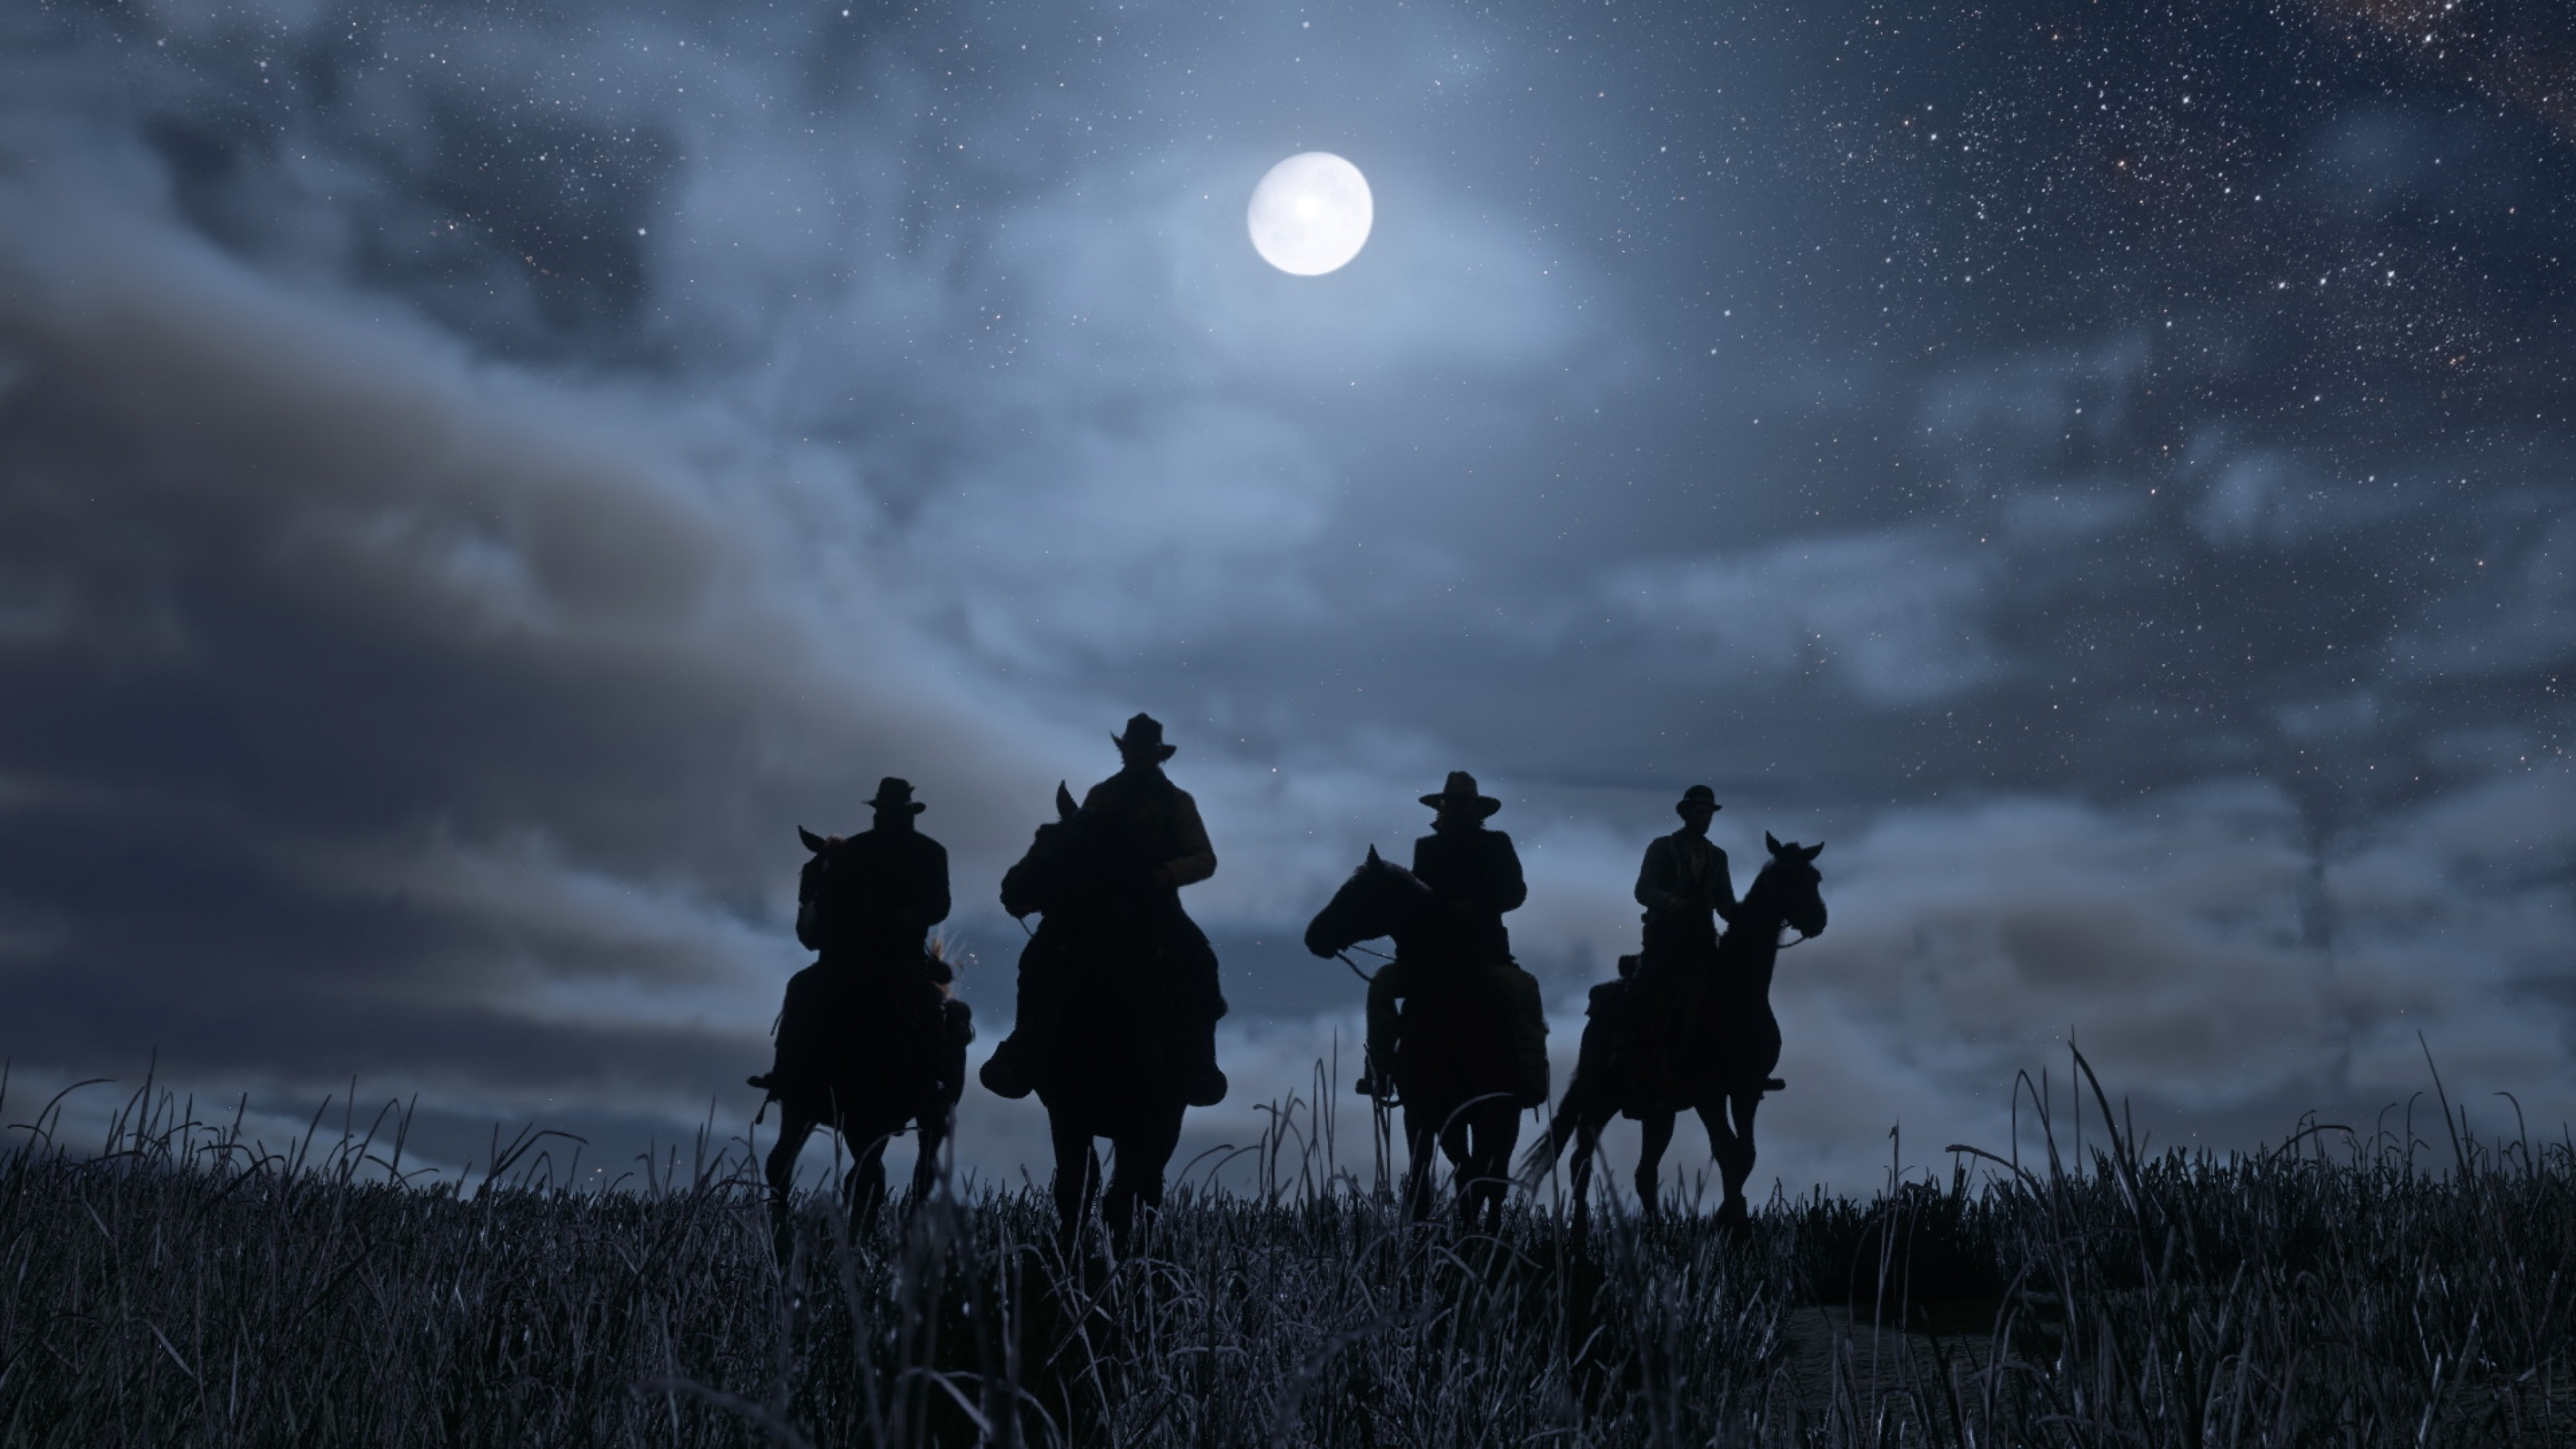 Рдр 5 класс. Red Dead Redemption 2. Red Dead Redemption 2 background. Red Dead Redemption 2 Wallpaper.